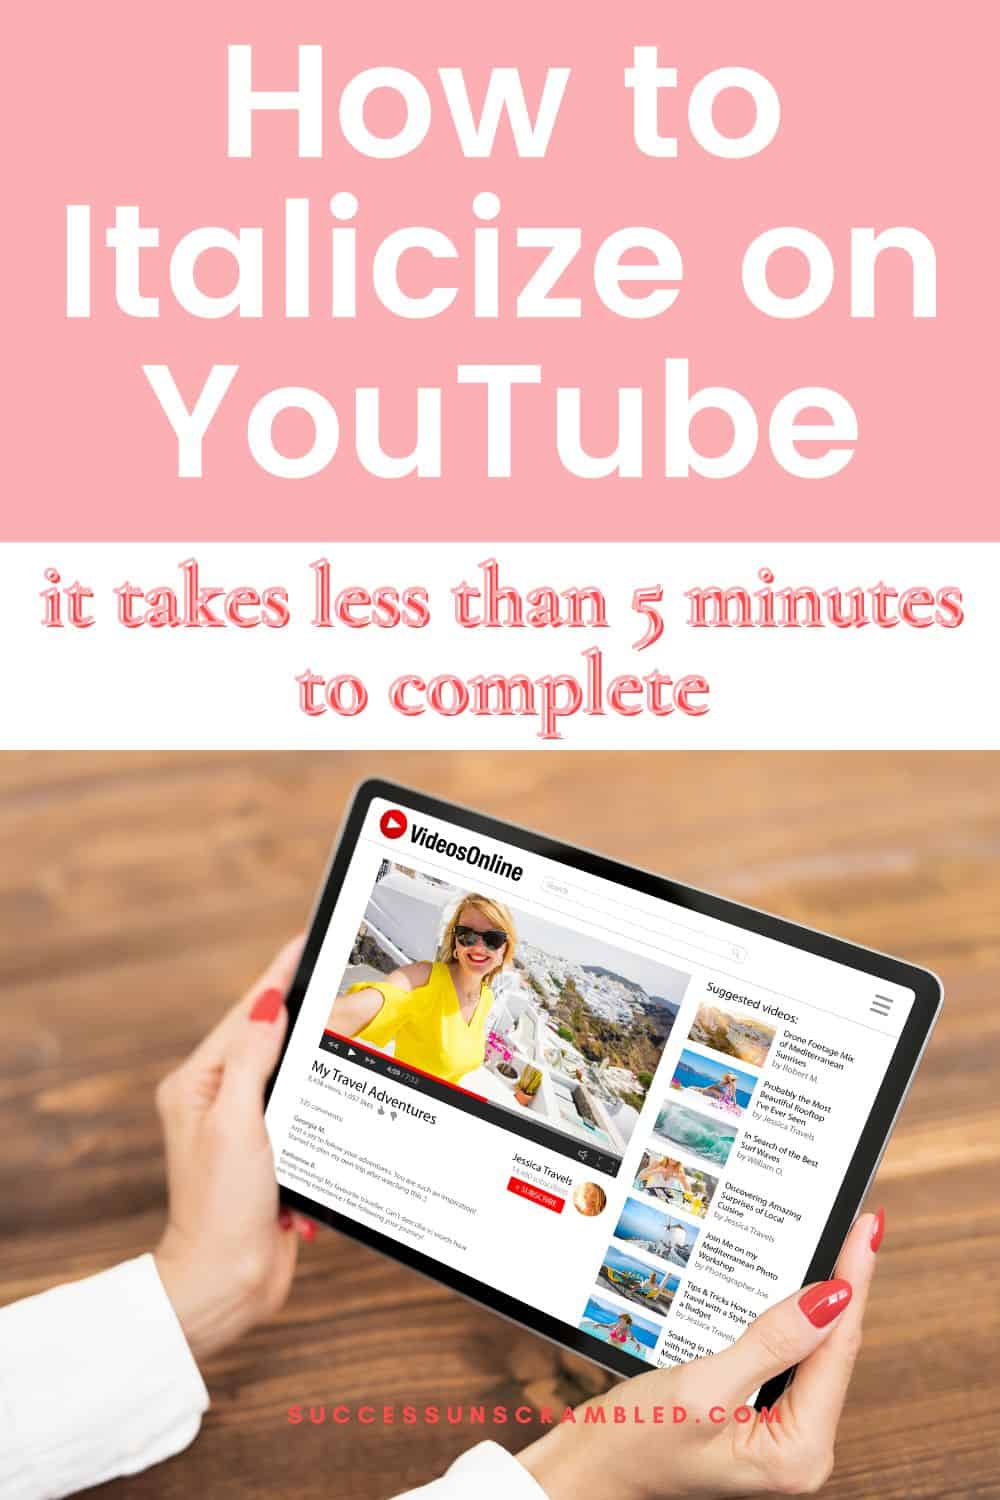 image showing someone holding a tablet with a video on a YouTube page